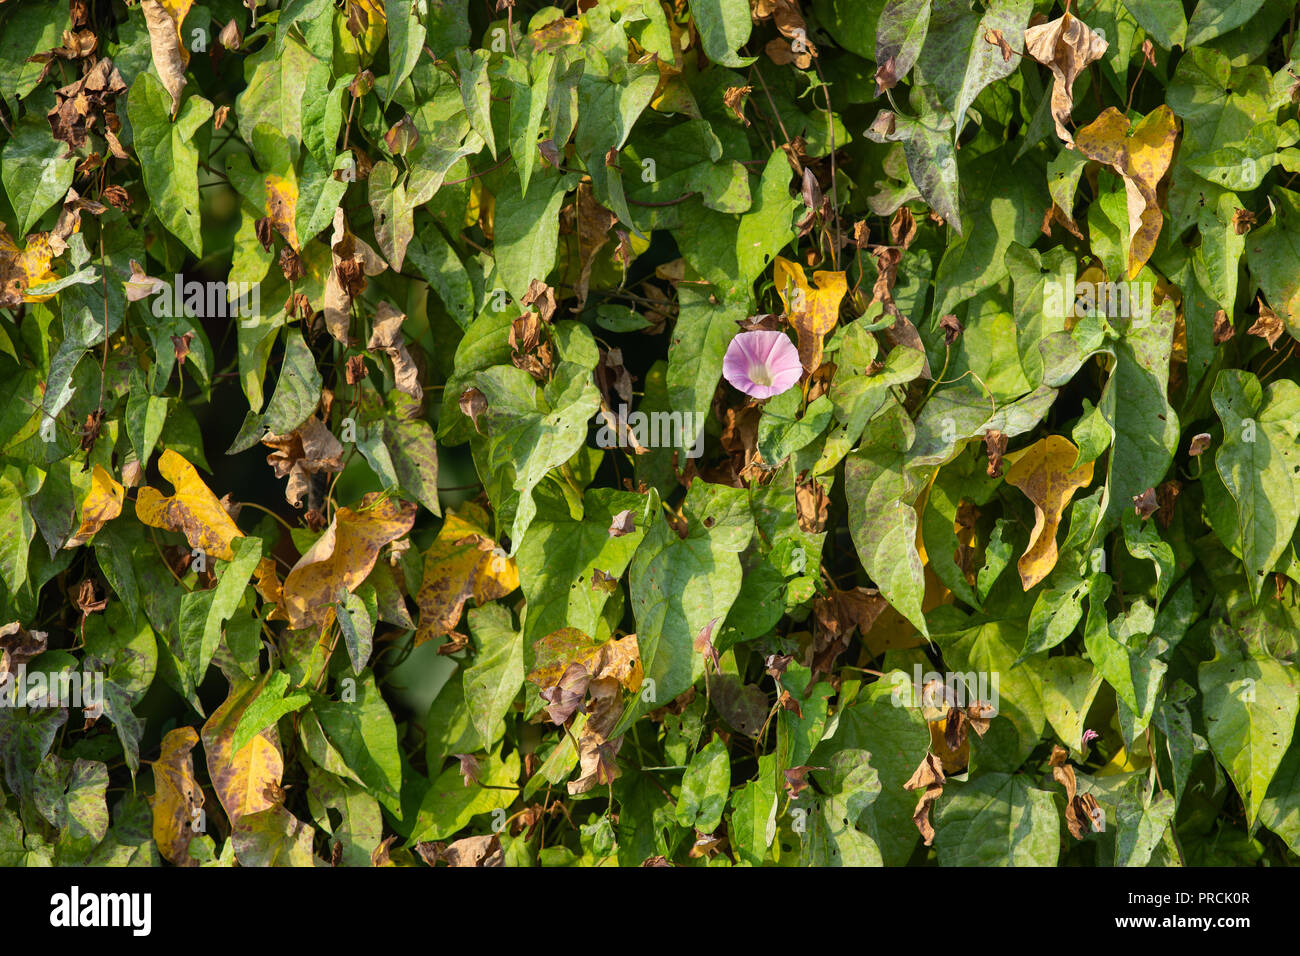 Natural live wall or hedge made of field bindweed plant or Convolvulus arvensis. Single light violet flower. Beautiful decorative floral background, b Stock Photo